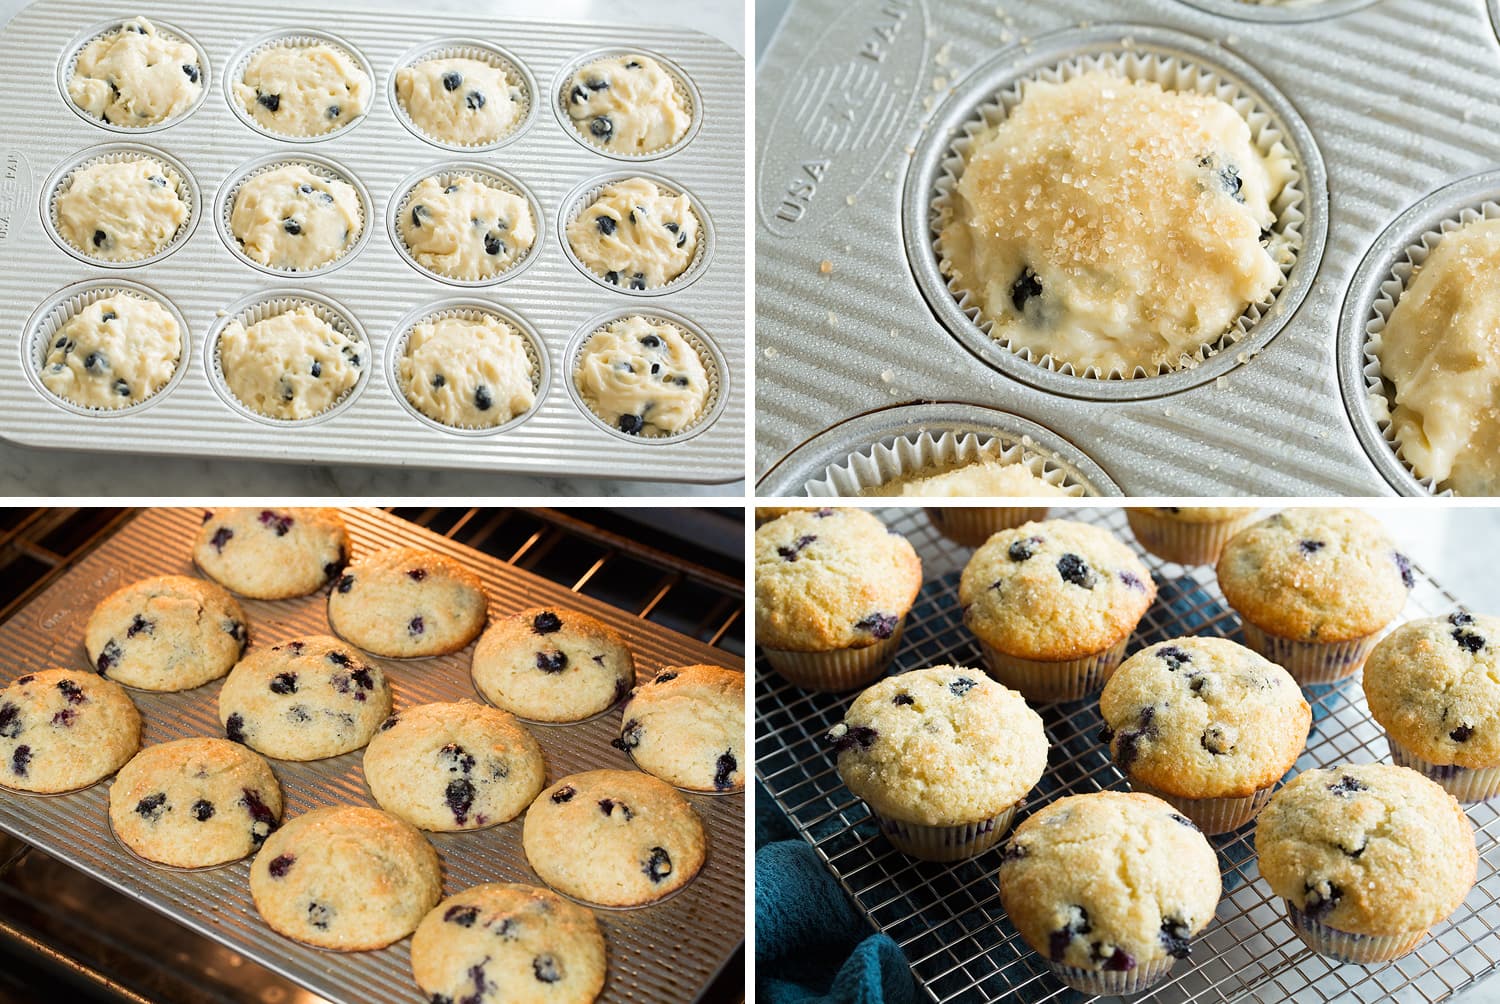 Showing how to bake blueberry muffin batter.